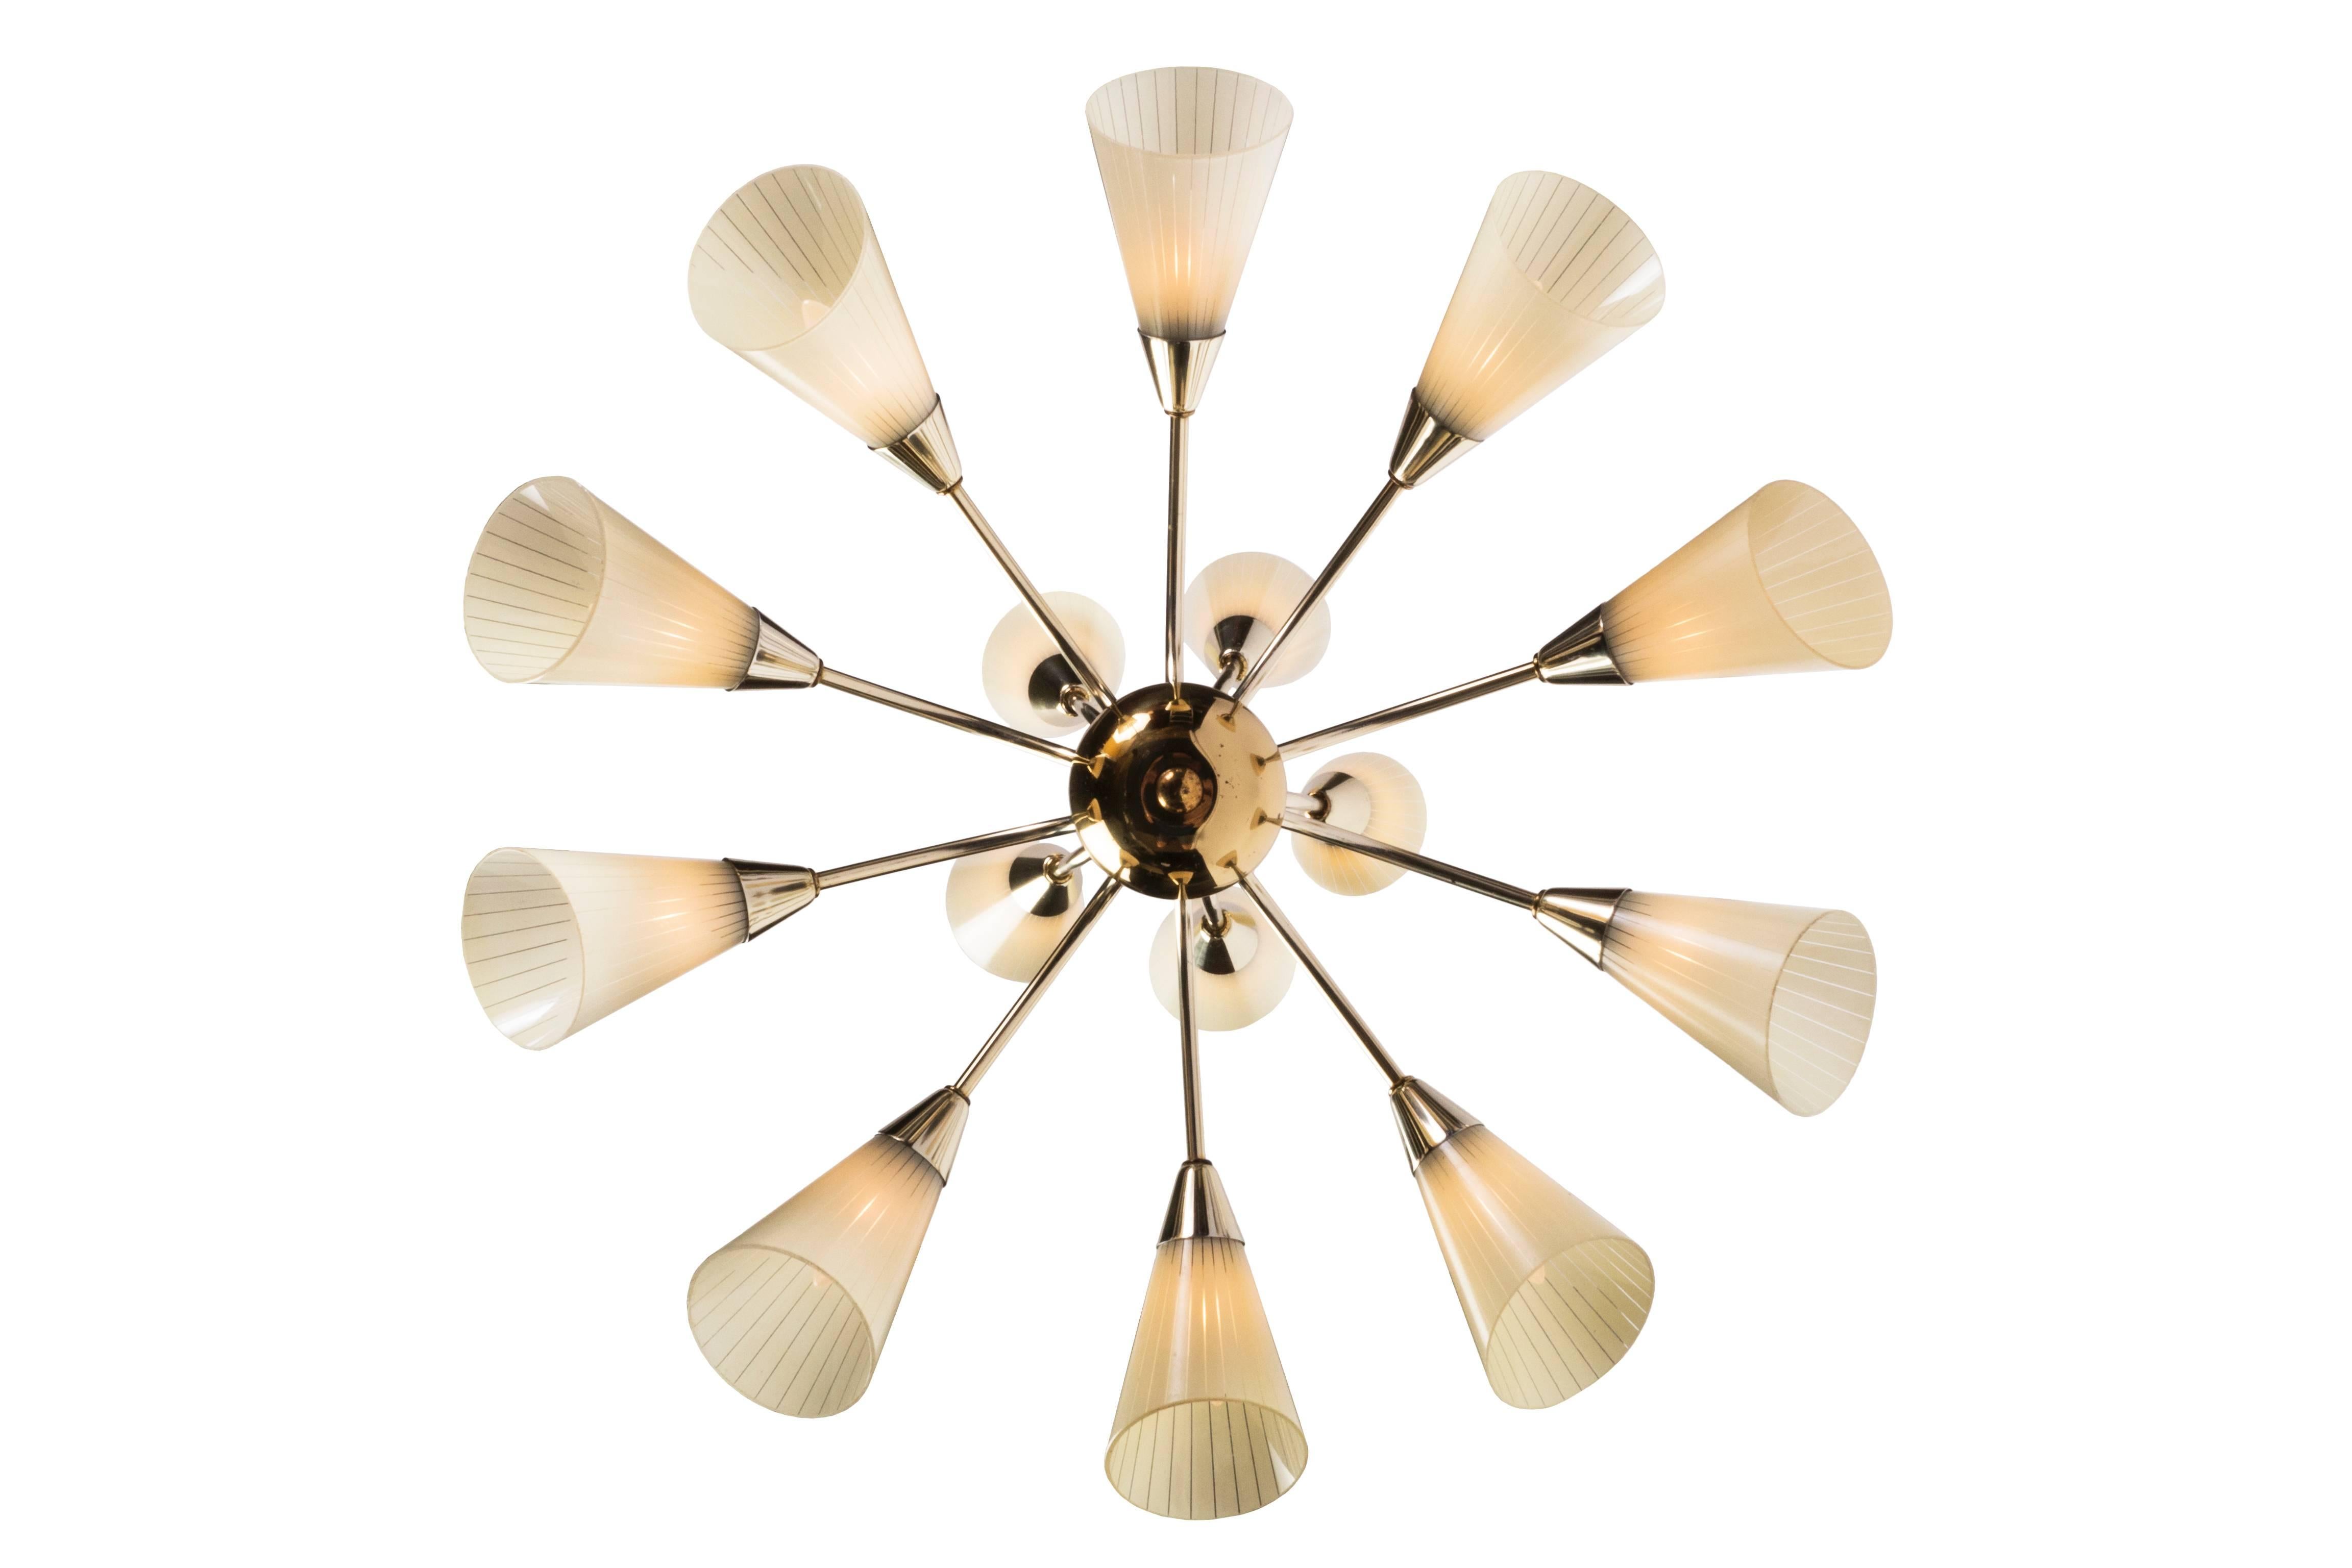 Sensational Mid-Century Modernist Tulip Chandelier in the Manner of Adnet In Good Condition For Sale In Kingston, NY